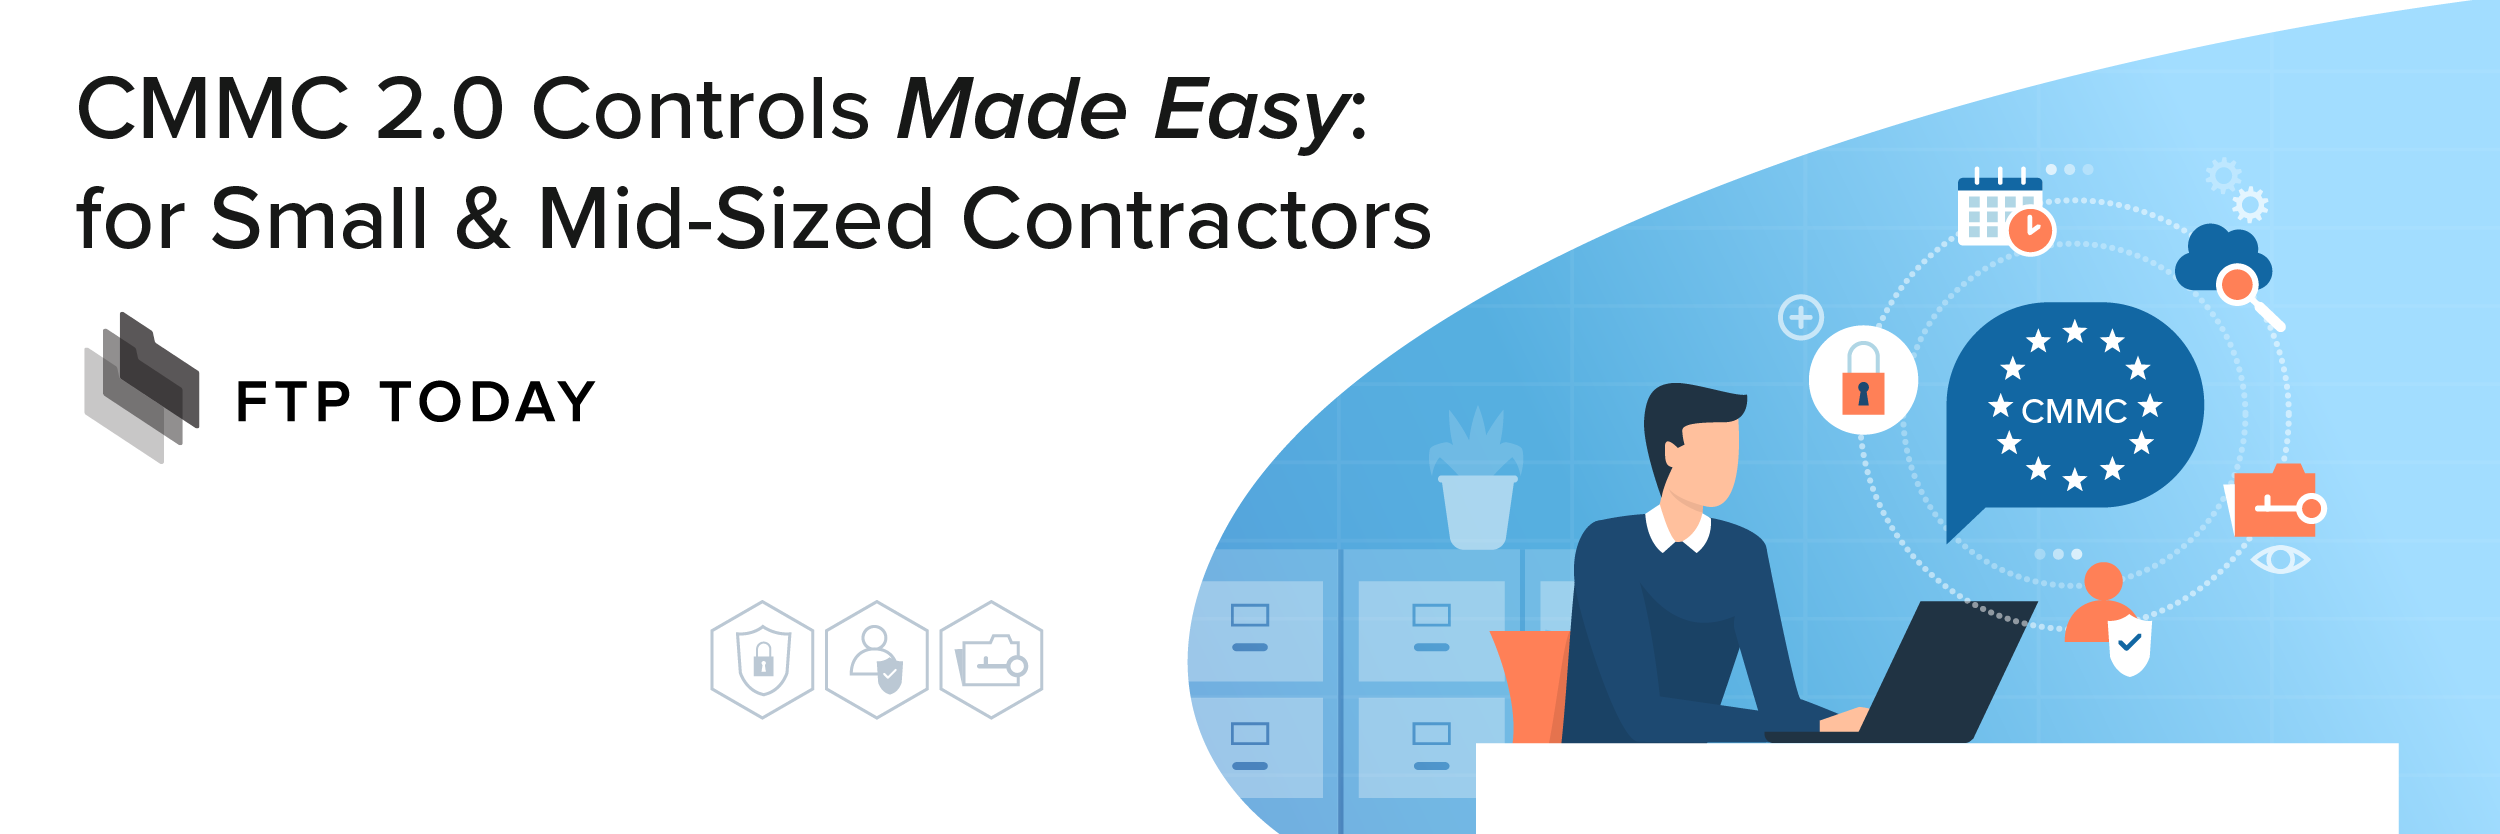 CMMC 2.0 Controls Made Easy for Small & Mid-Sized Contractors